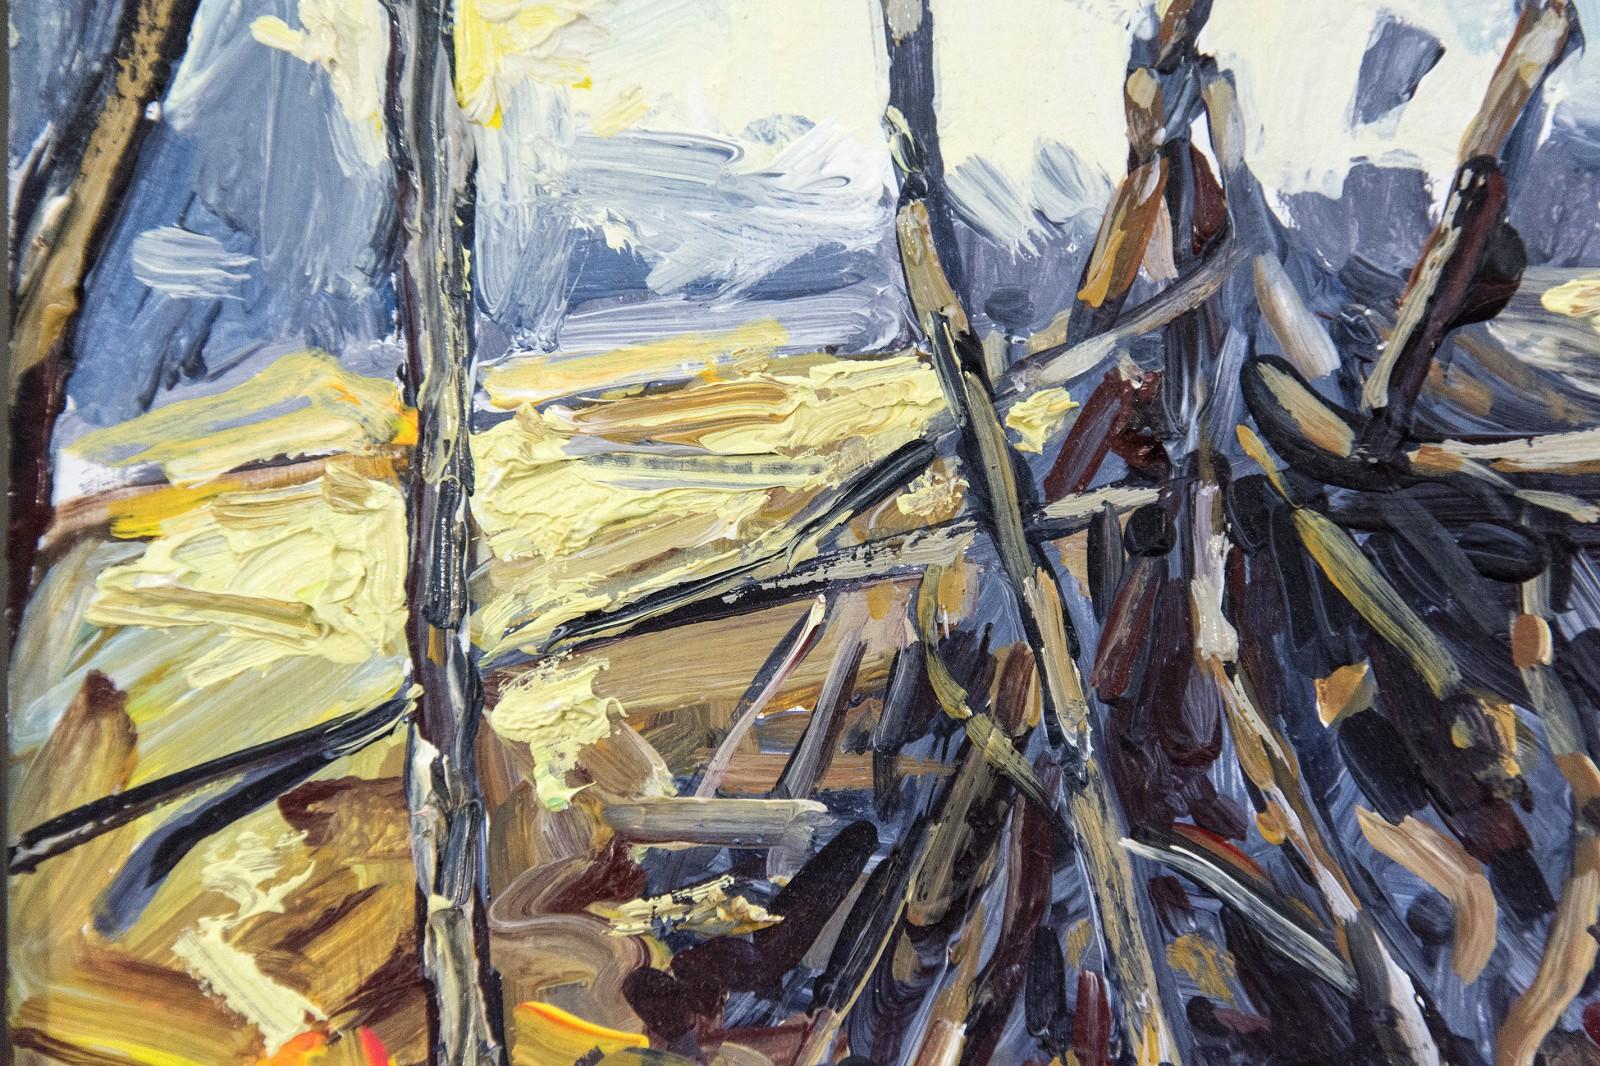 A distant landscape is viewed through a lattice of dark branches in this delightful and intimately sized composition by Julie Himel. This en plein air impasto landscape is framed, 6.25 x 6.25 inches.

Julie Himel completed a BFA at York University